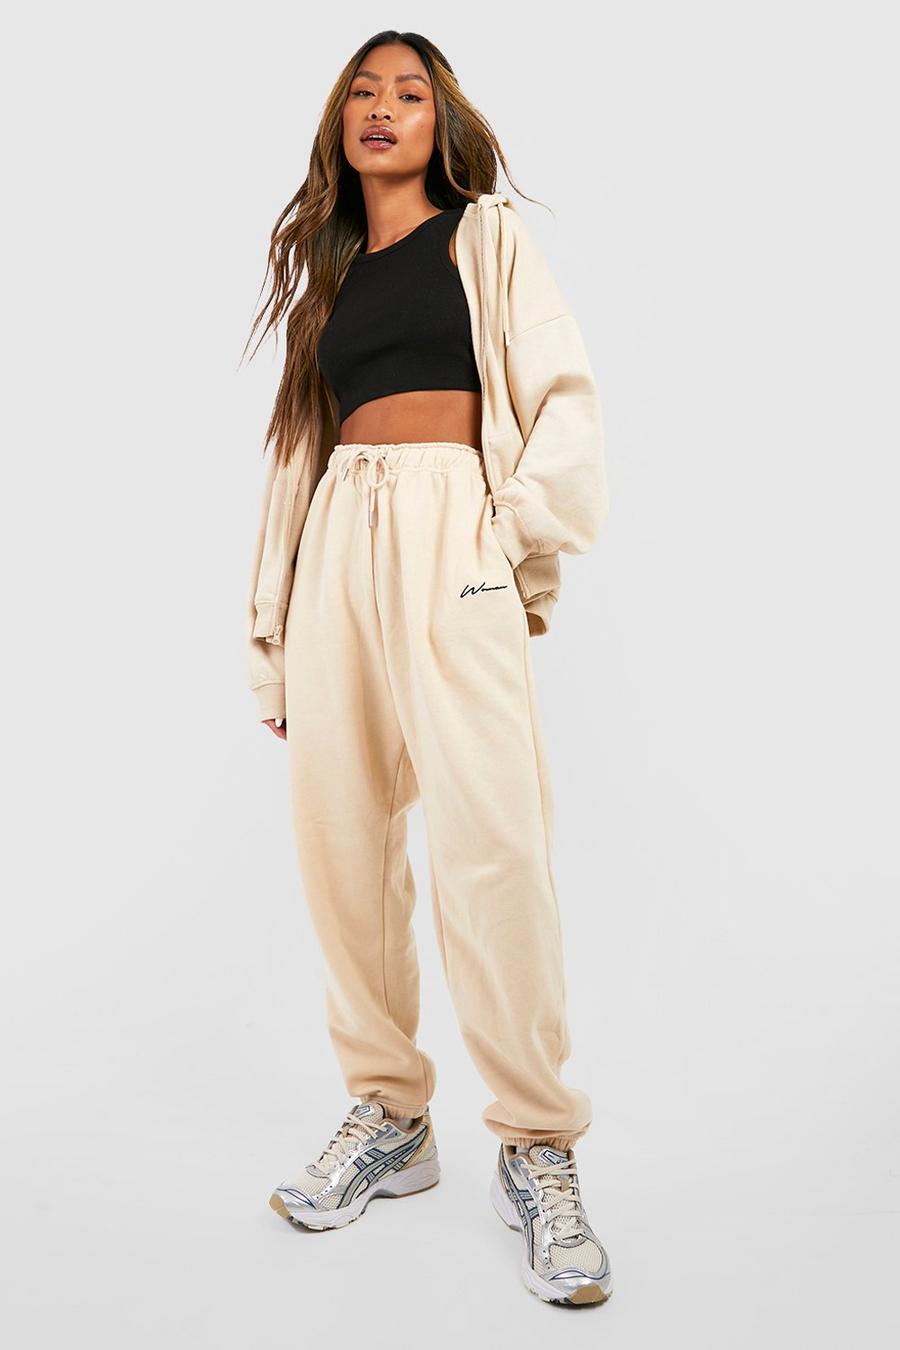 Stone beis Oversized Woman Joggers